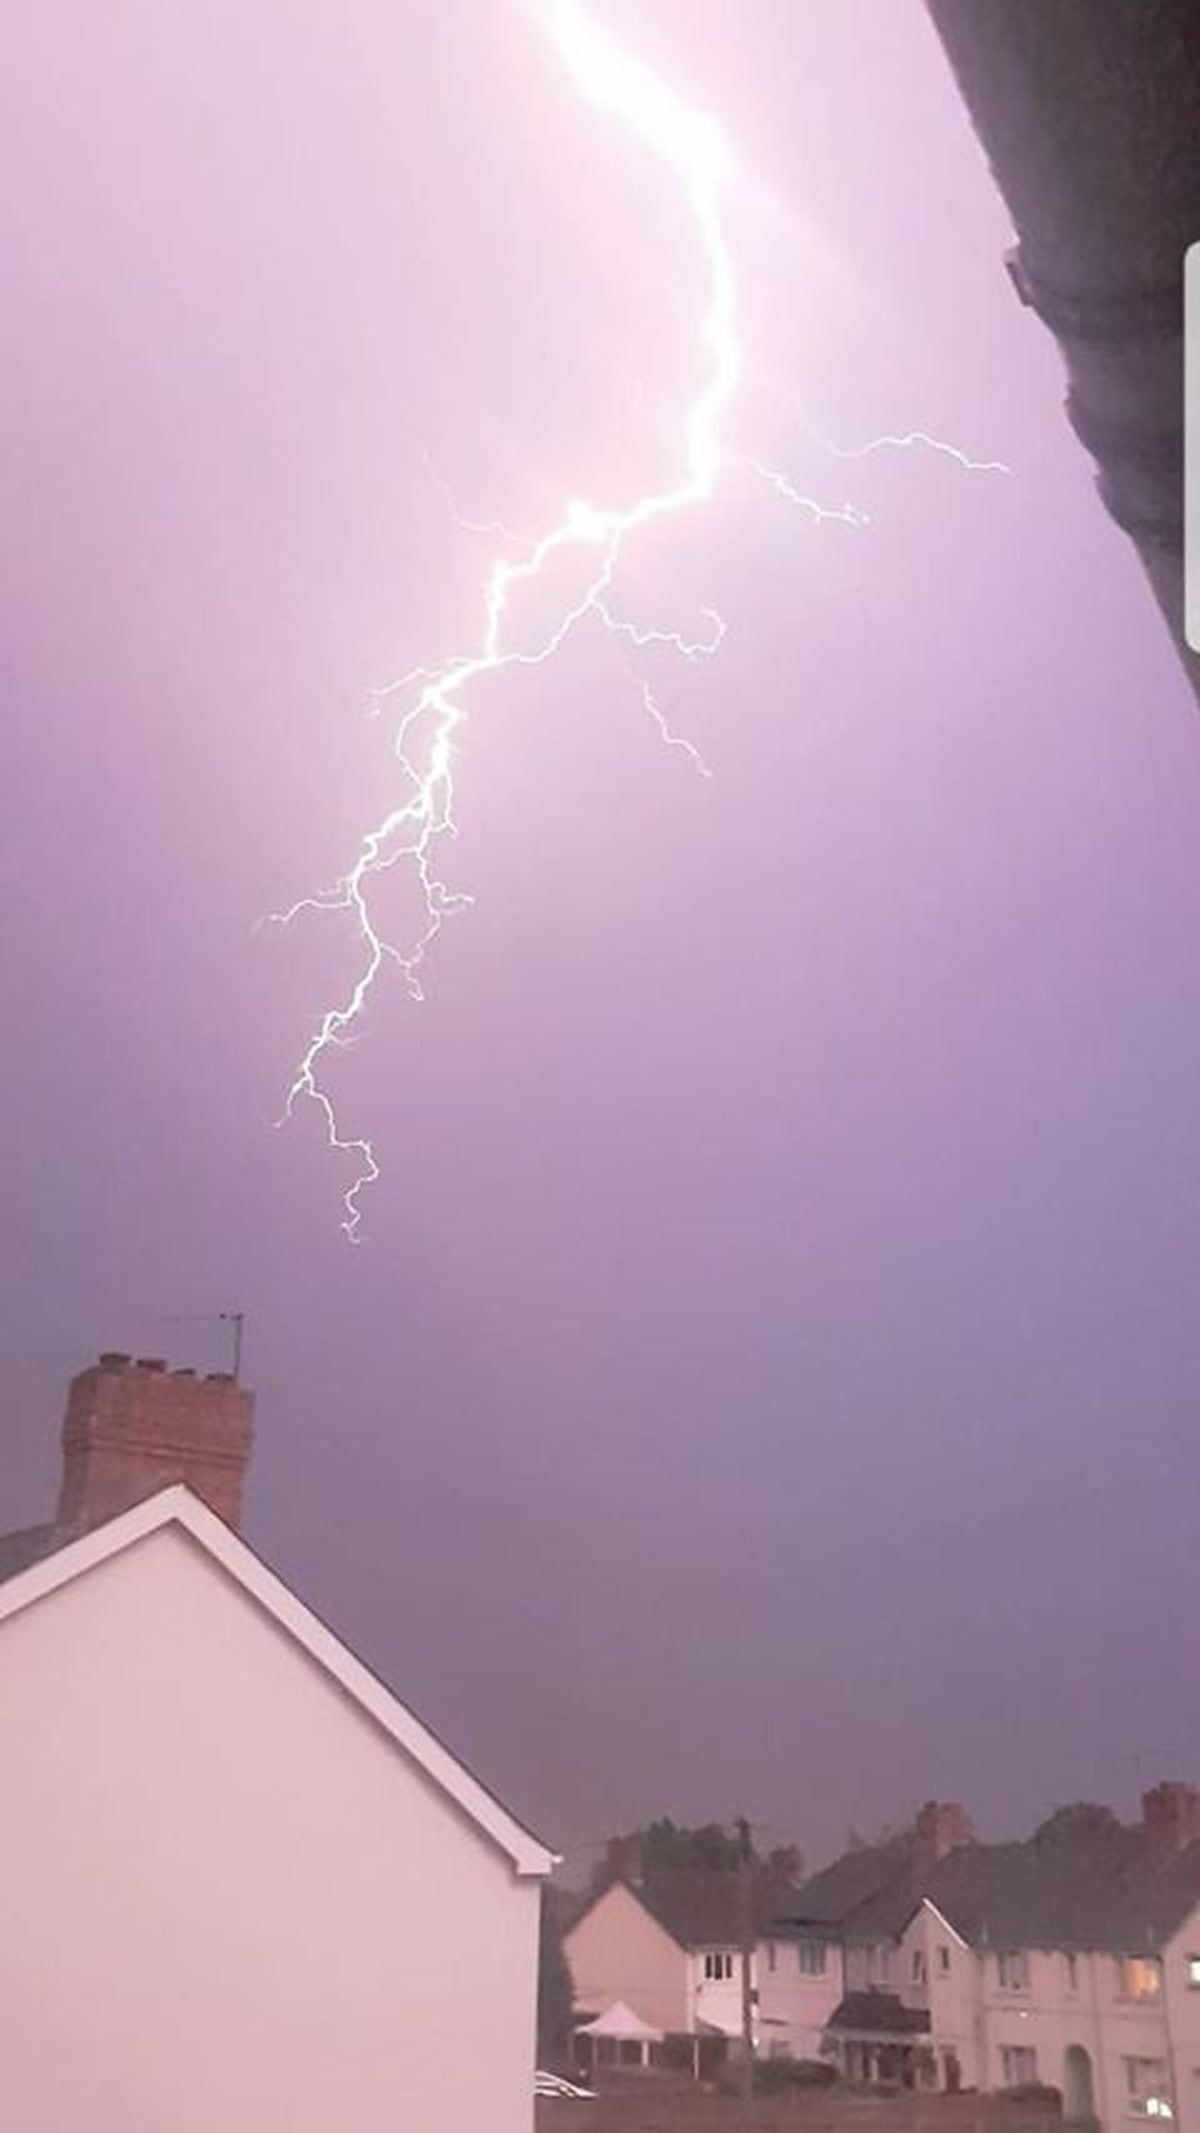 Lightning seen in Willenhall and captured by Kas Tonks